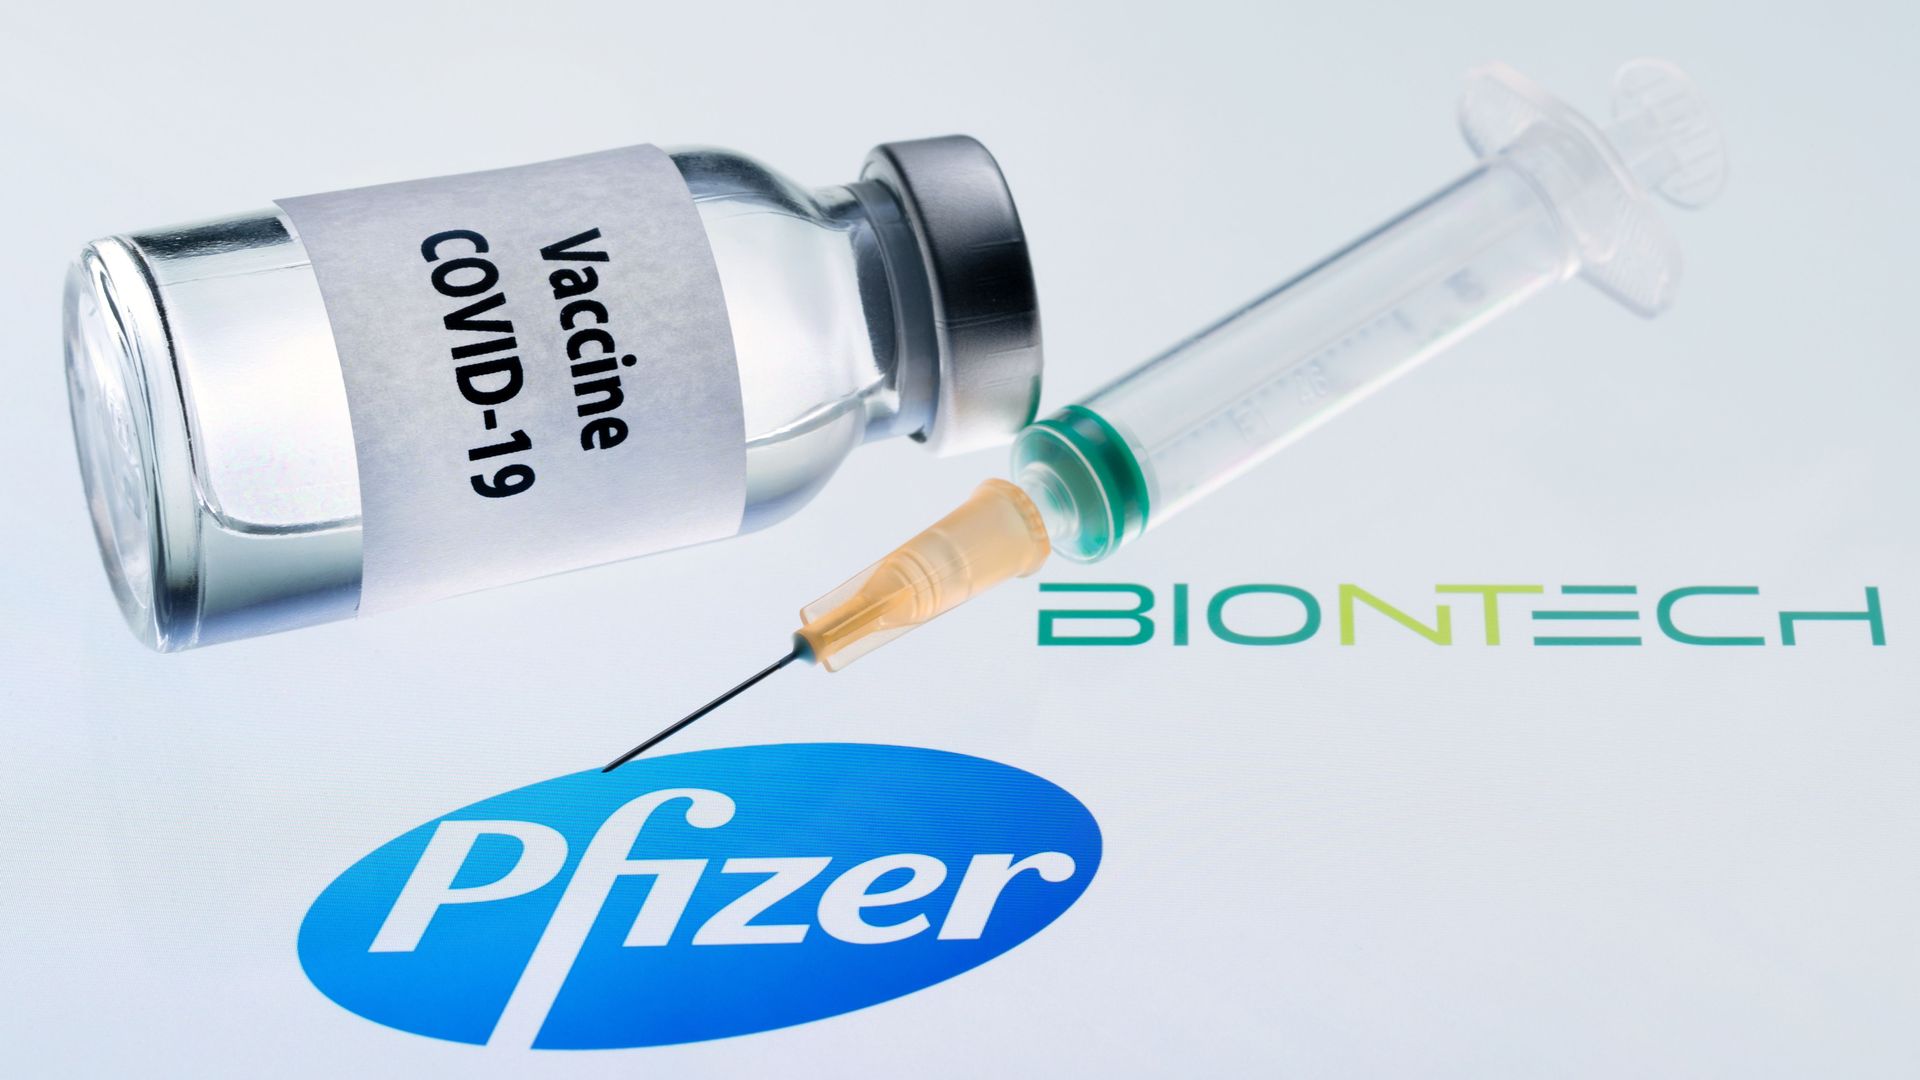 the Vaccine in a syringe and bottle